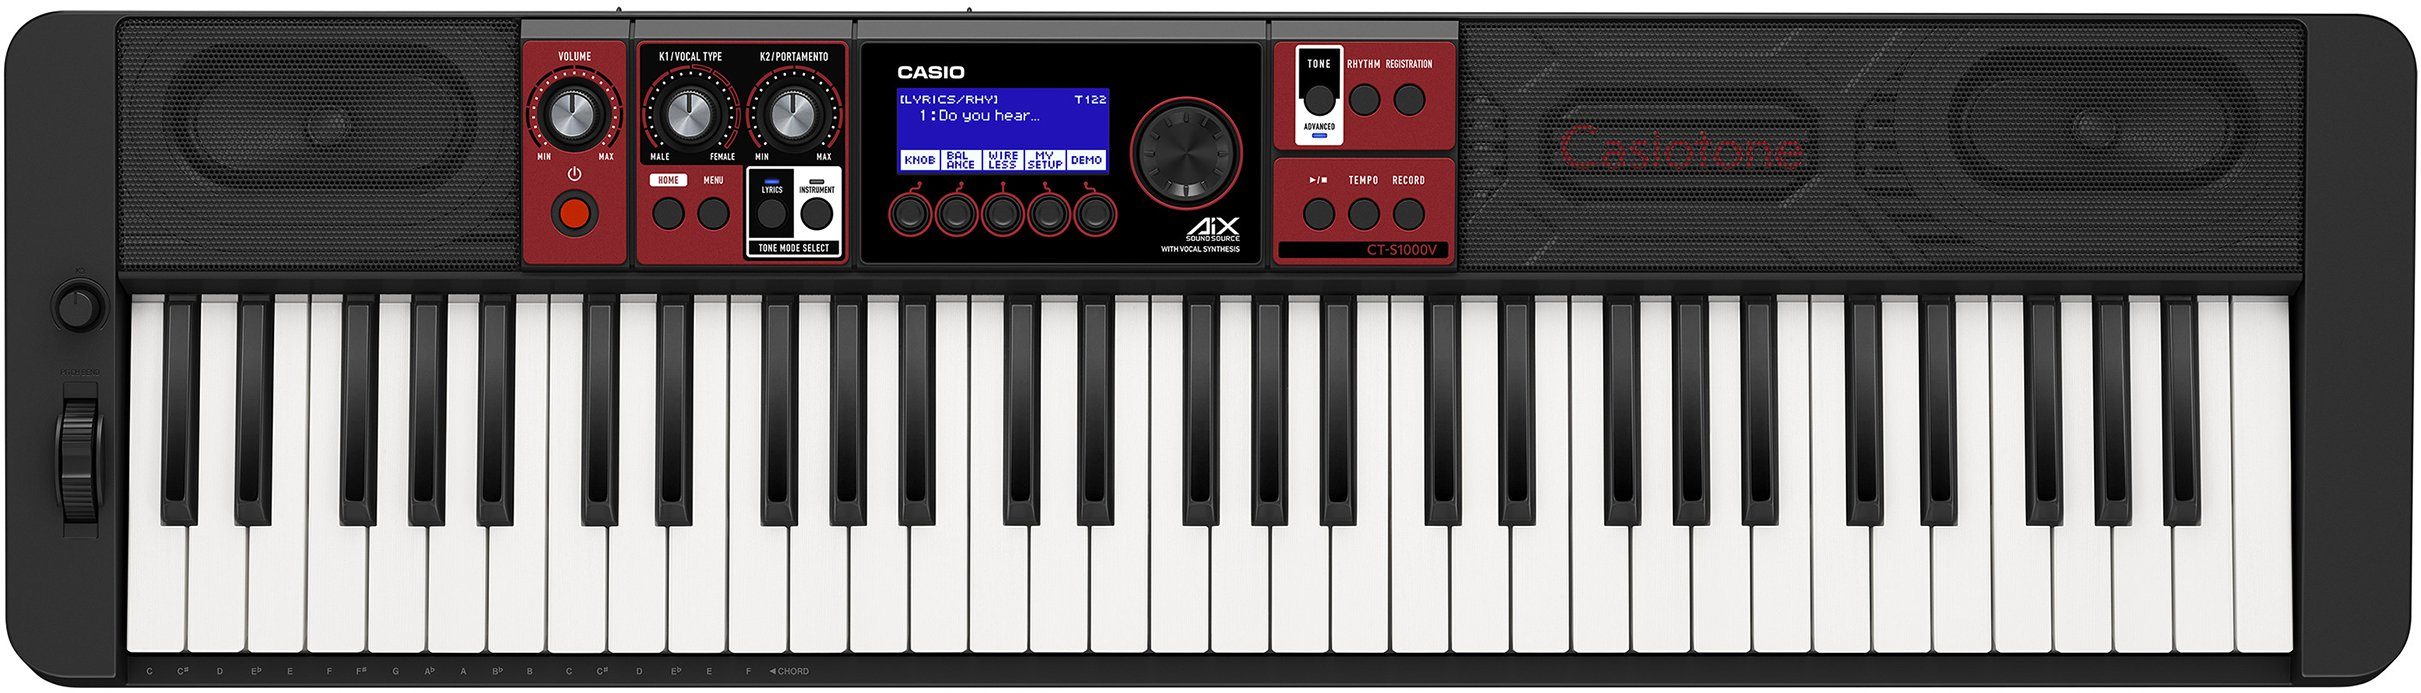 mit Home-Keyboard CT-S1000V, CASIO Bluetooth-Adapter